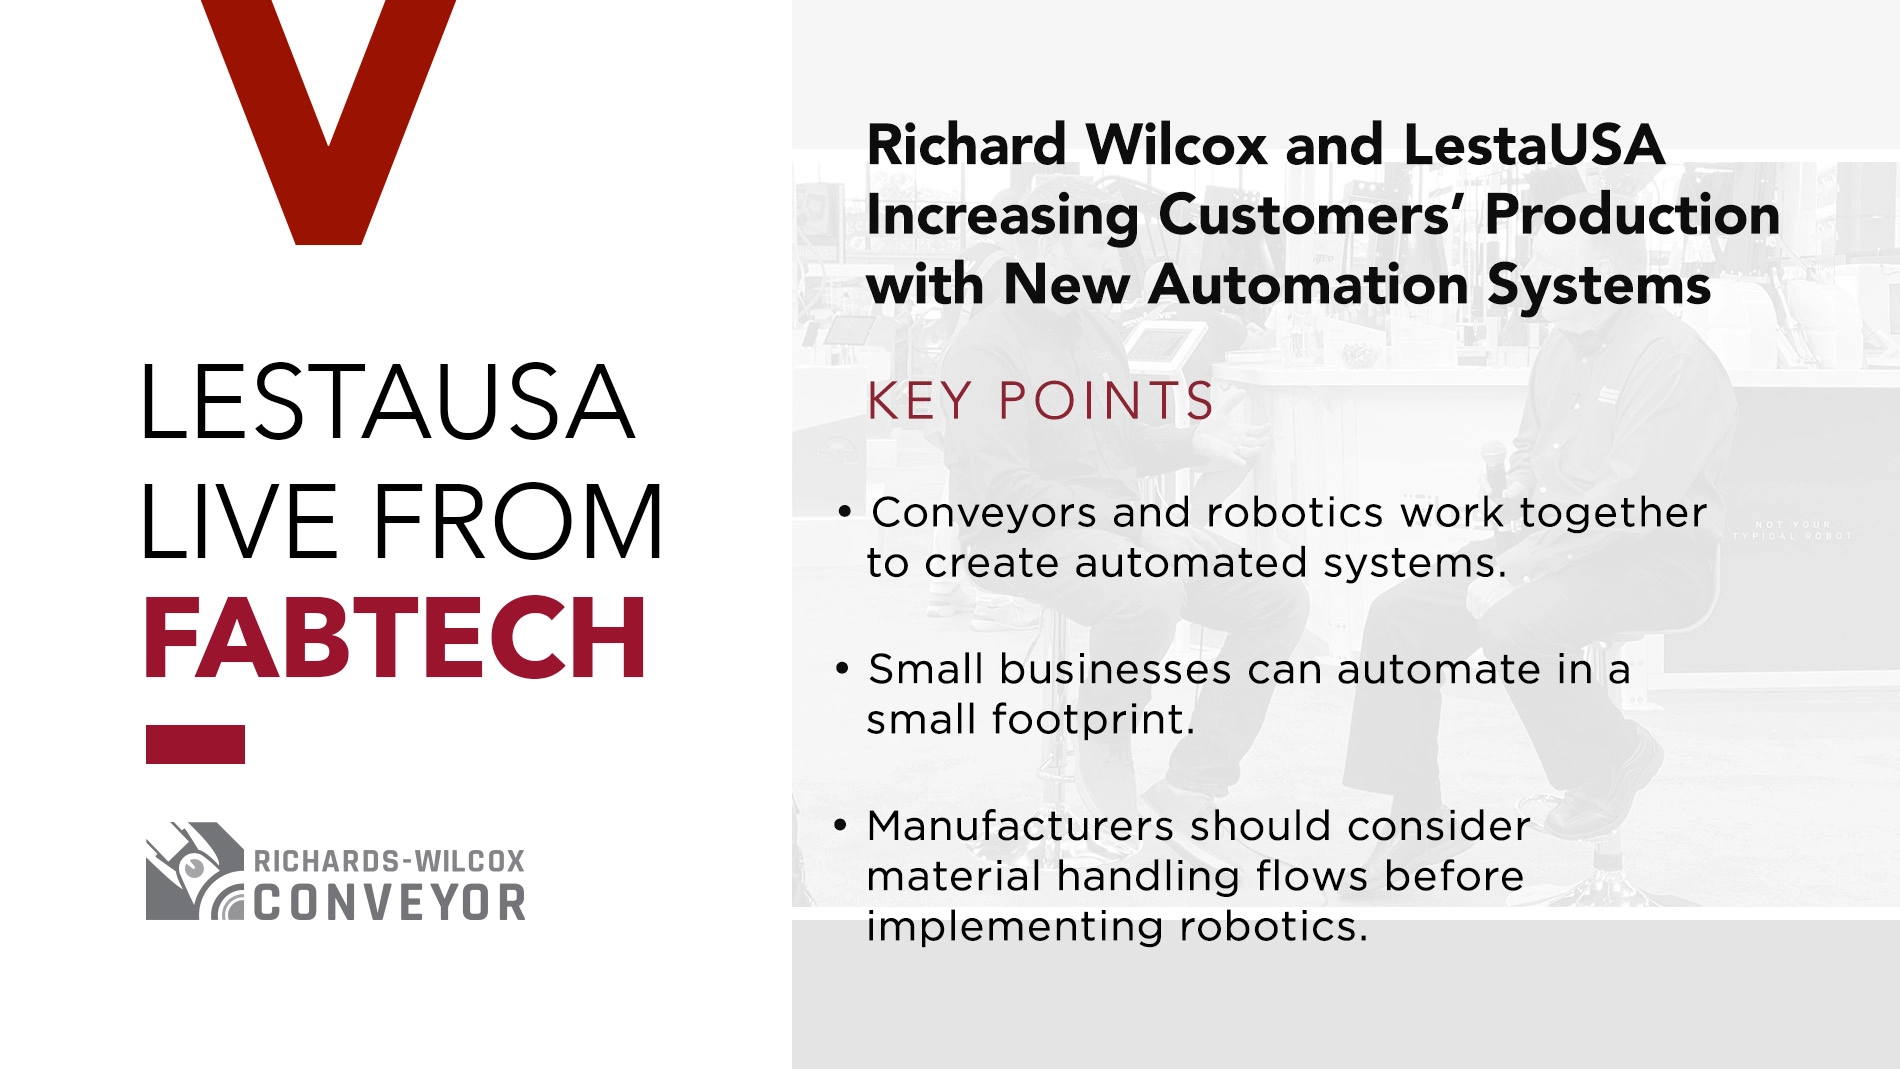 Manufacturing a Stronger Standard: Richard Wilcox and LestaUSA Increasing Customers’ Production with New Automation Systems